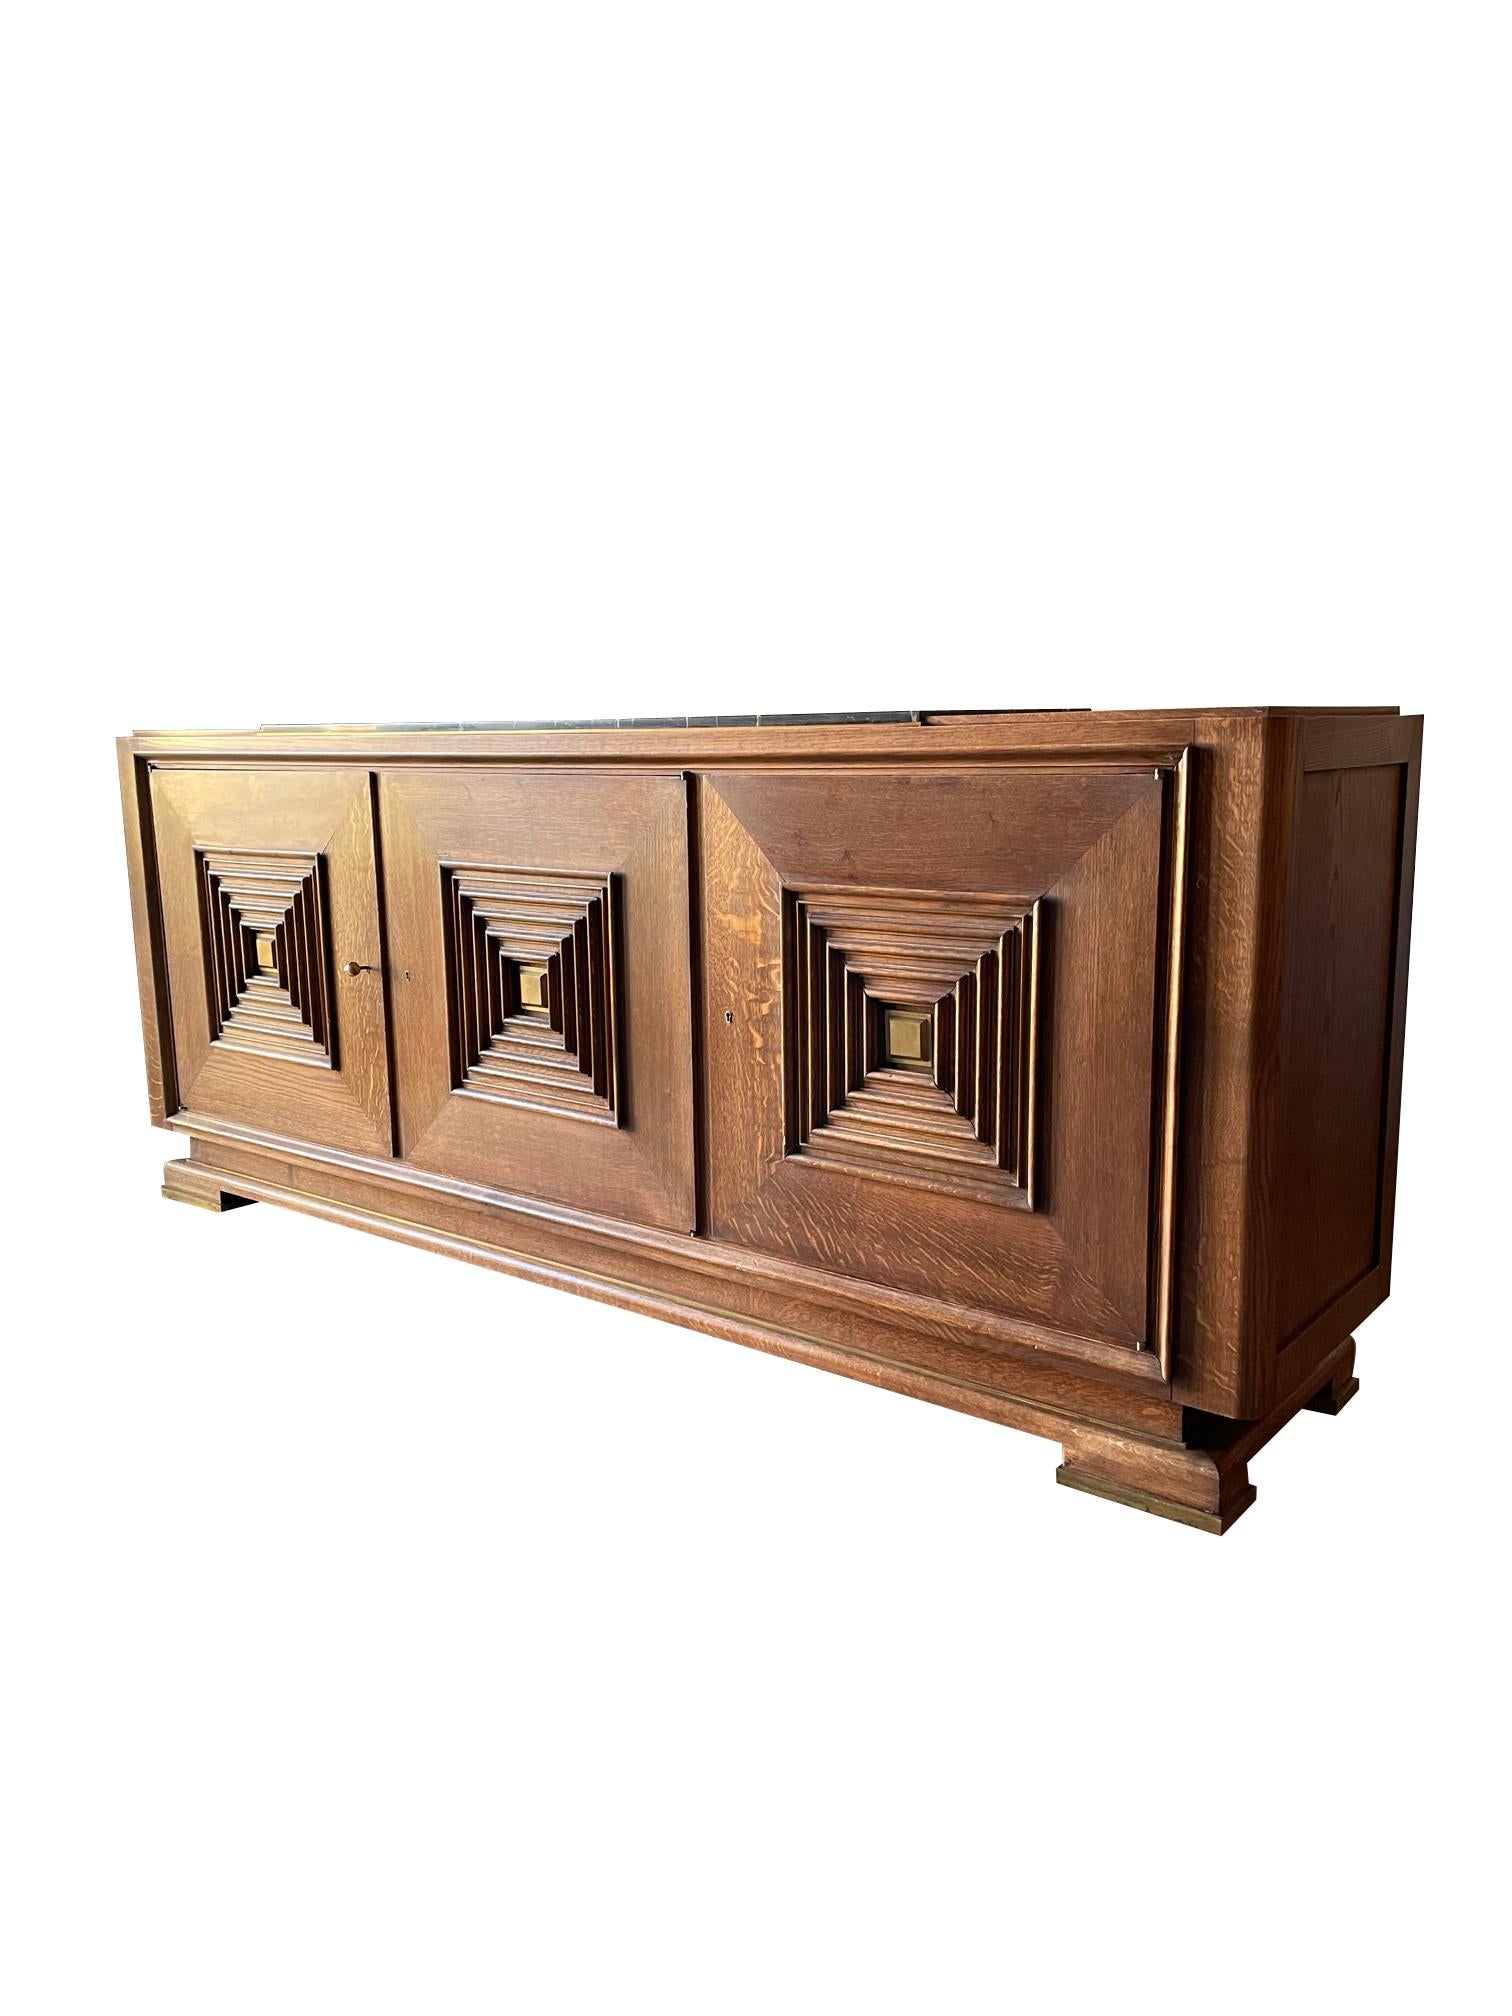 1960's French Maxime Old credenza.
Oak with center marble piece on top.
Three doors with signature concentric square panel design.
Six inner shelves and one inner drawer.
Decorative brass details.
Recently refinished.
ARRIVING TBD.